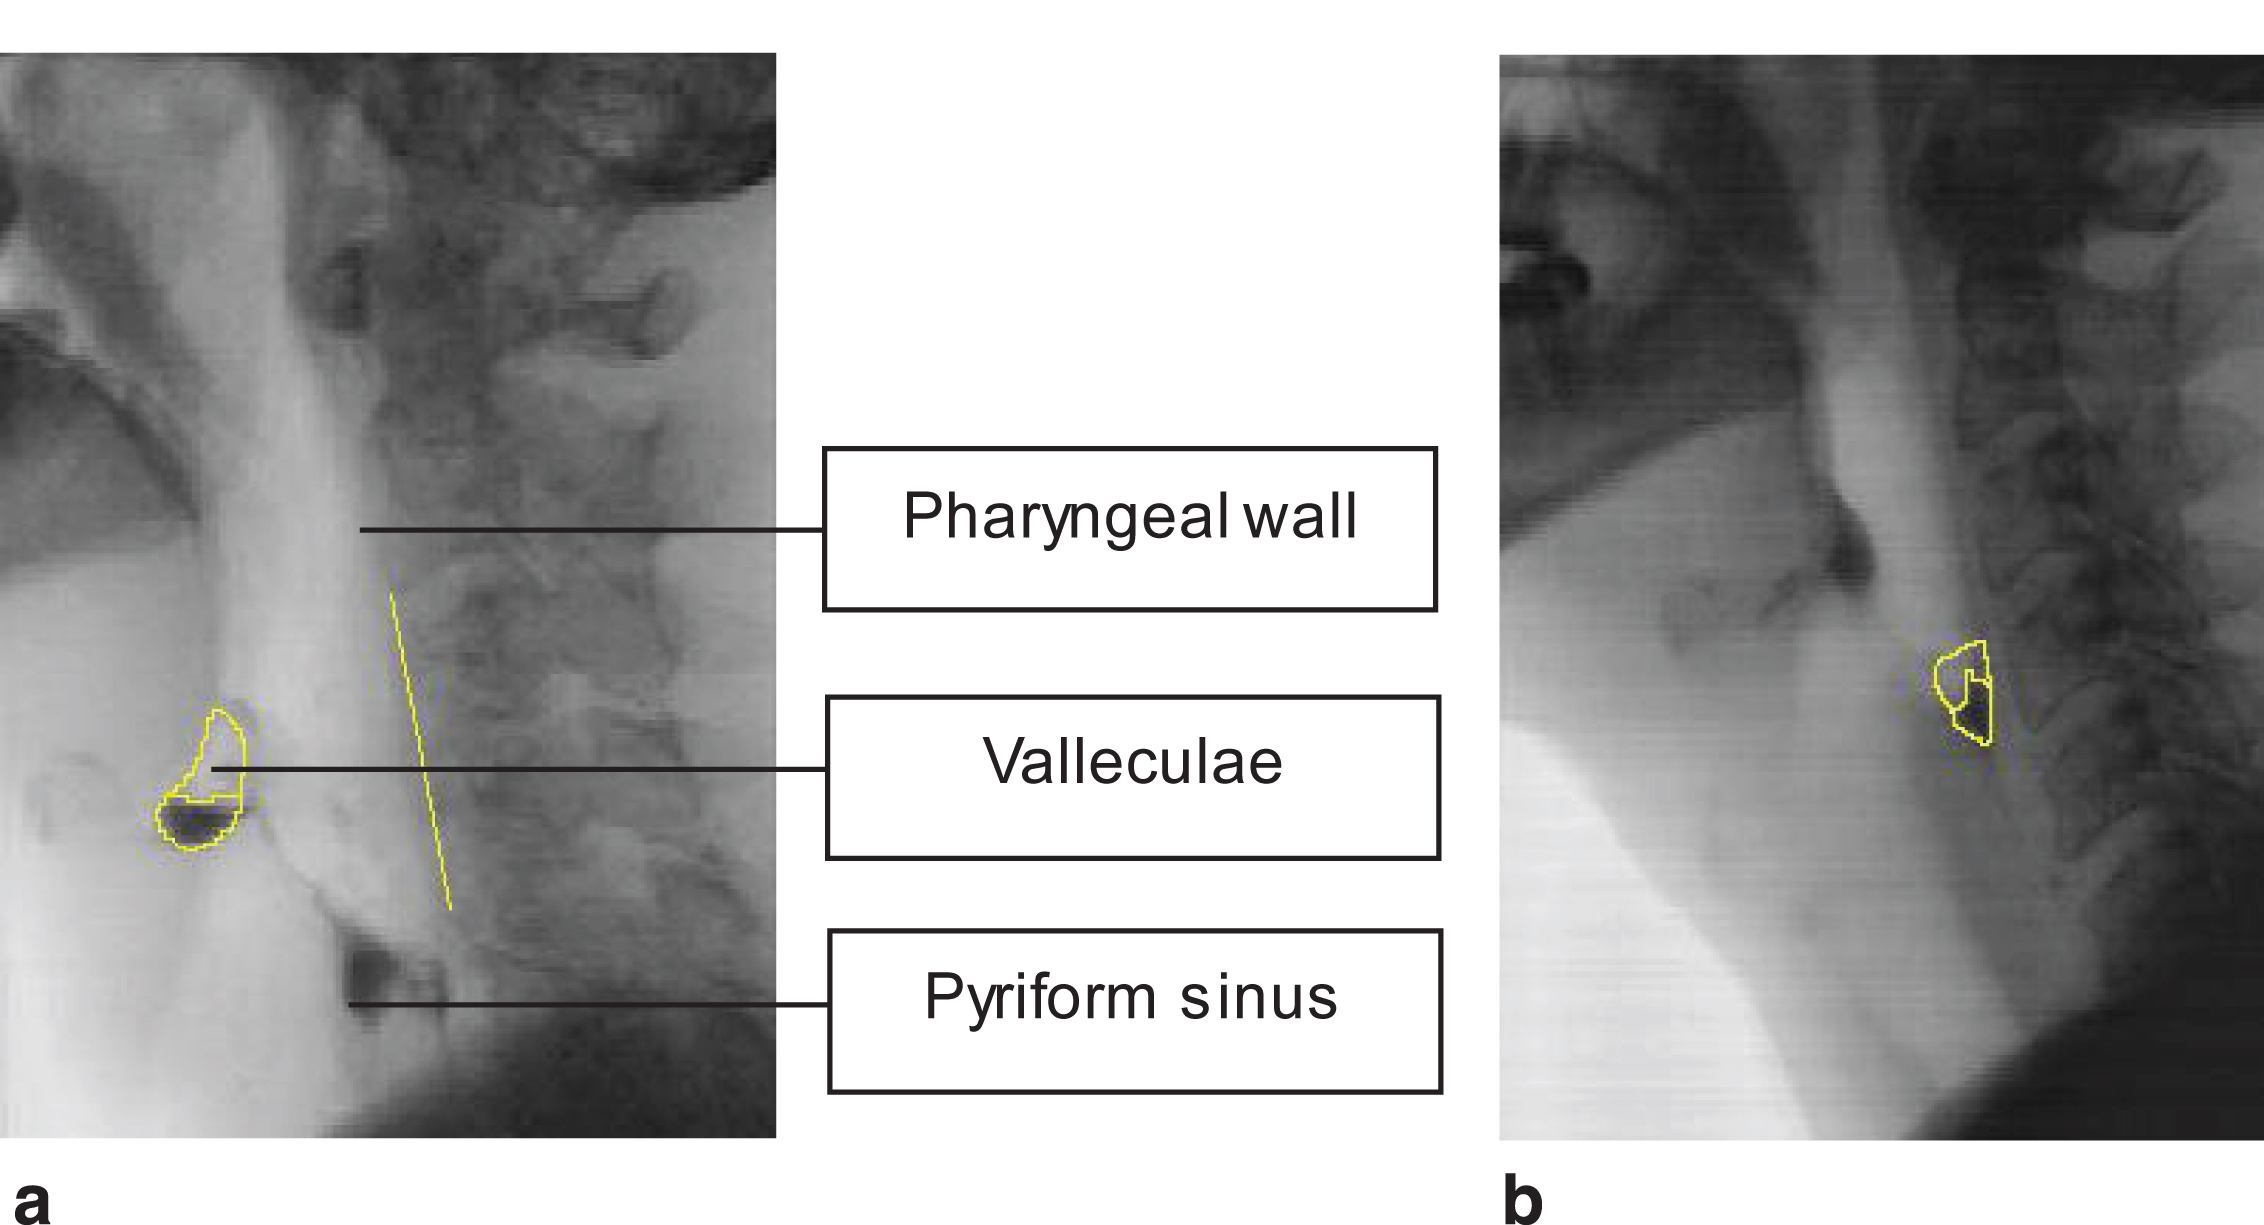 a. Post swallow residue in the valleculae and the scalar reference line from C2 to C4. b. Post swallow residue in the pyriform sinus.